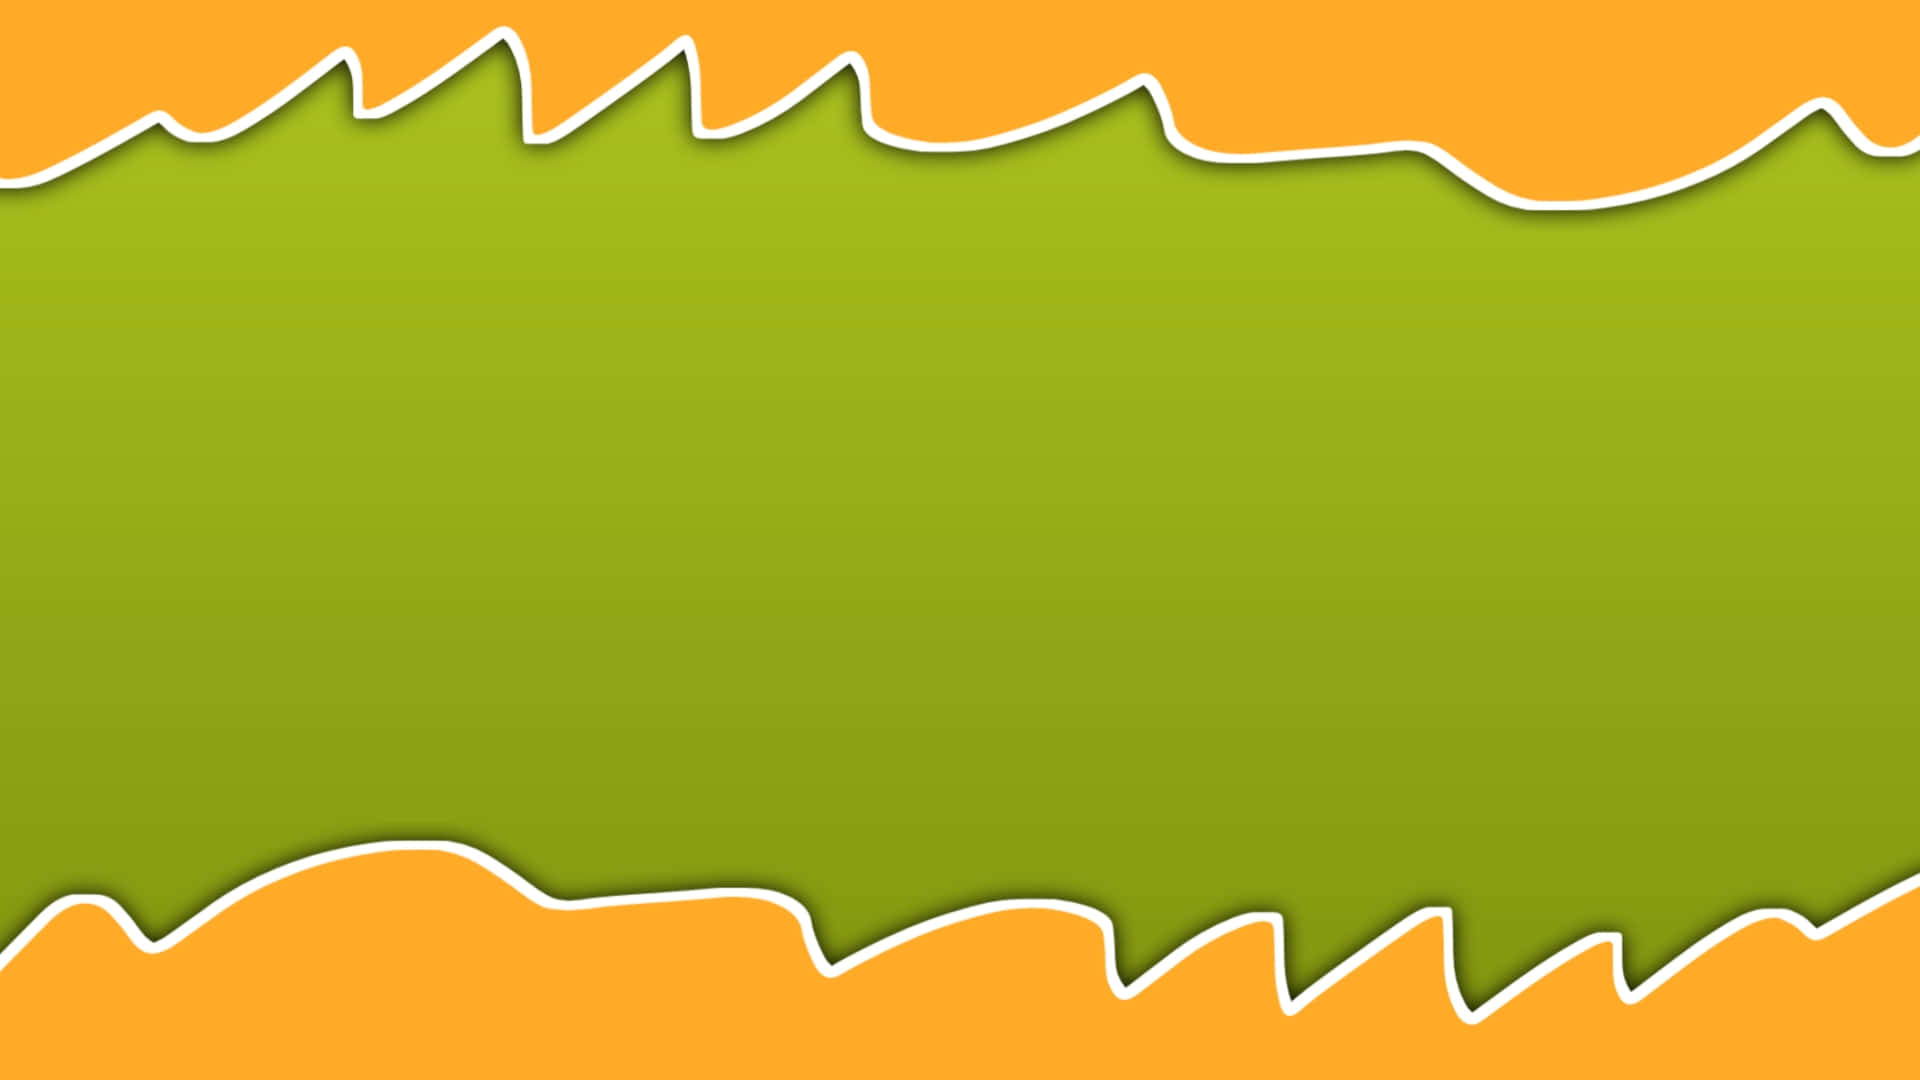 green and orange background with a speech bubble